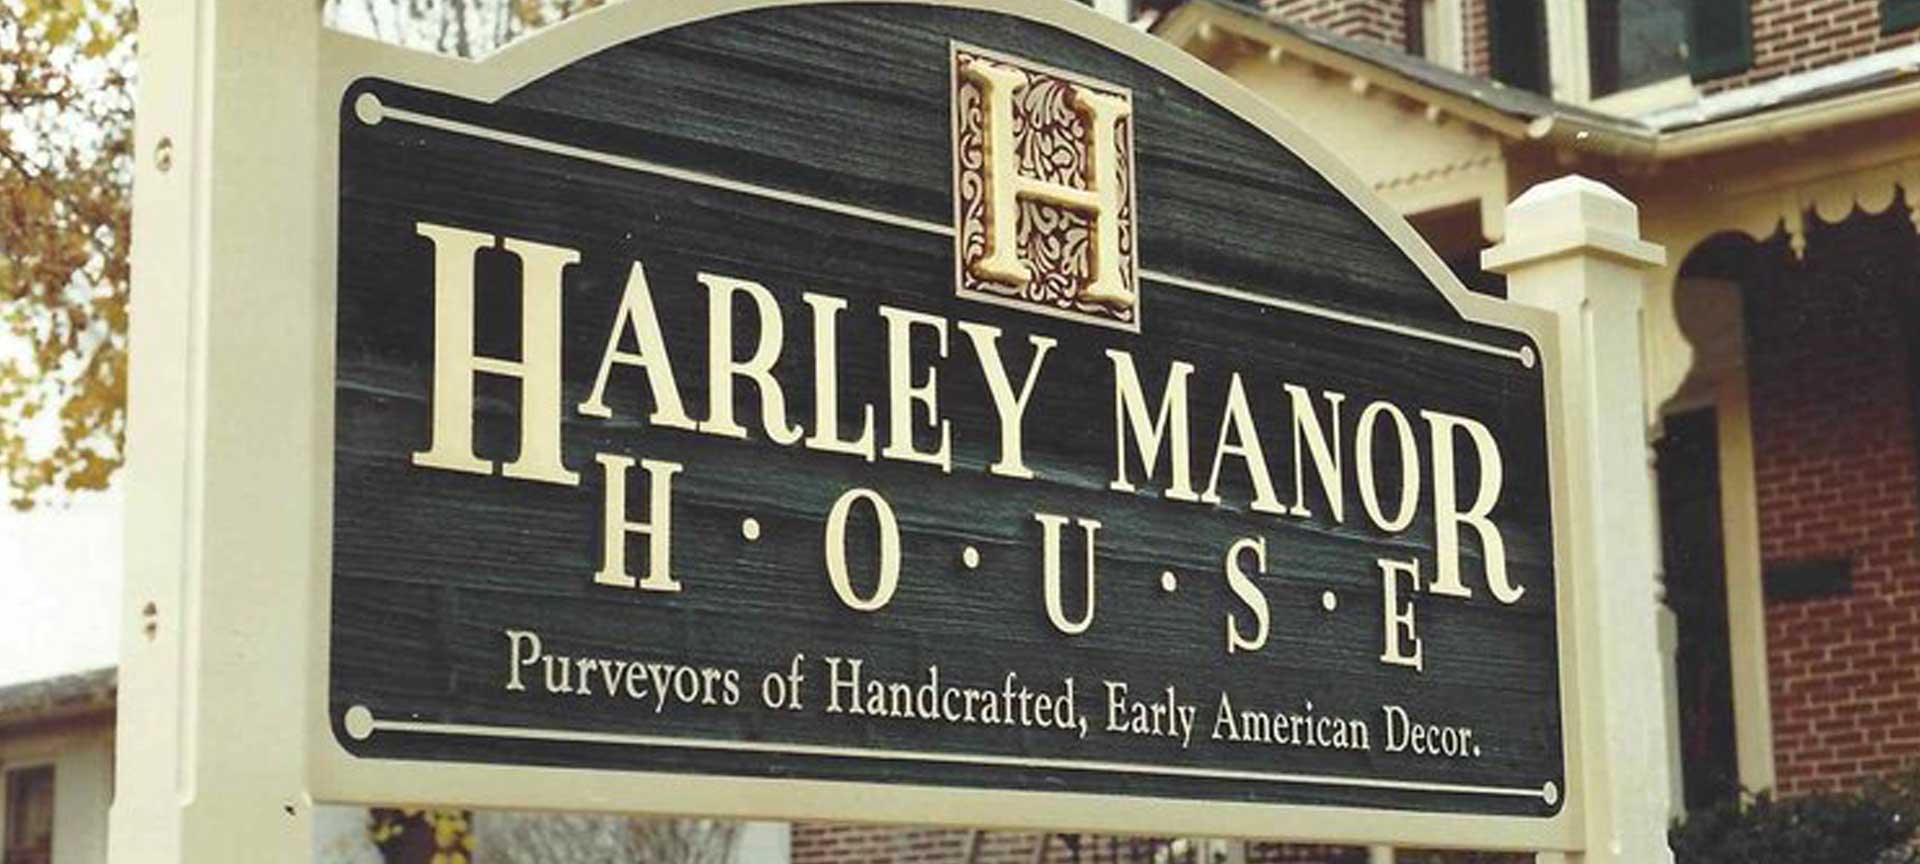 Harley Manor House Sign